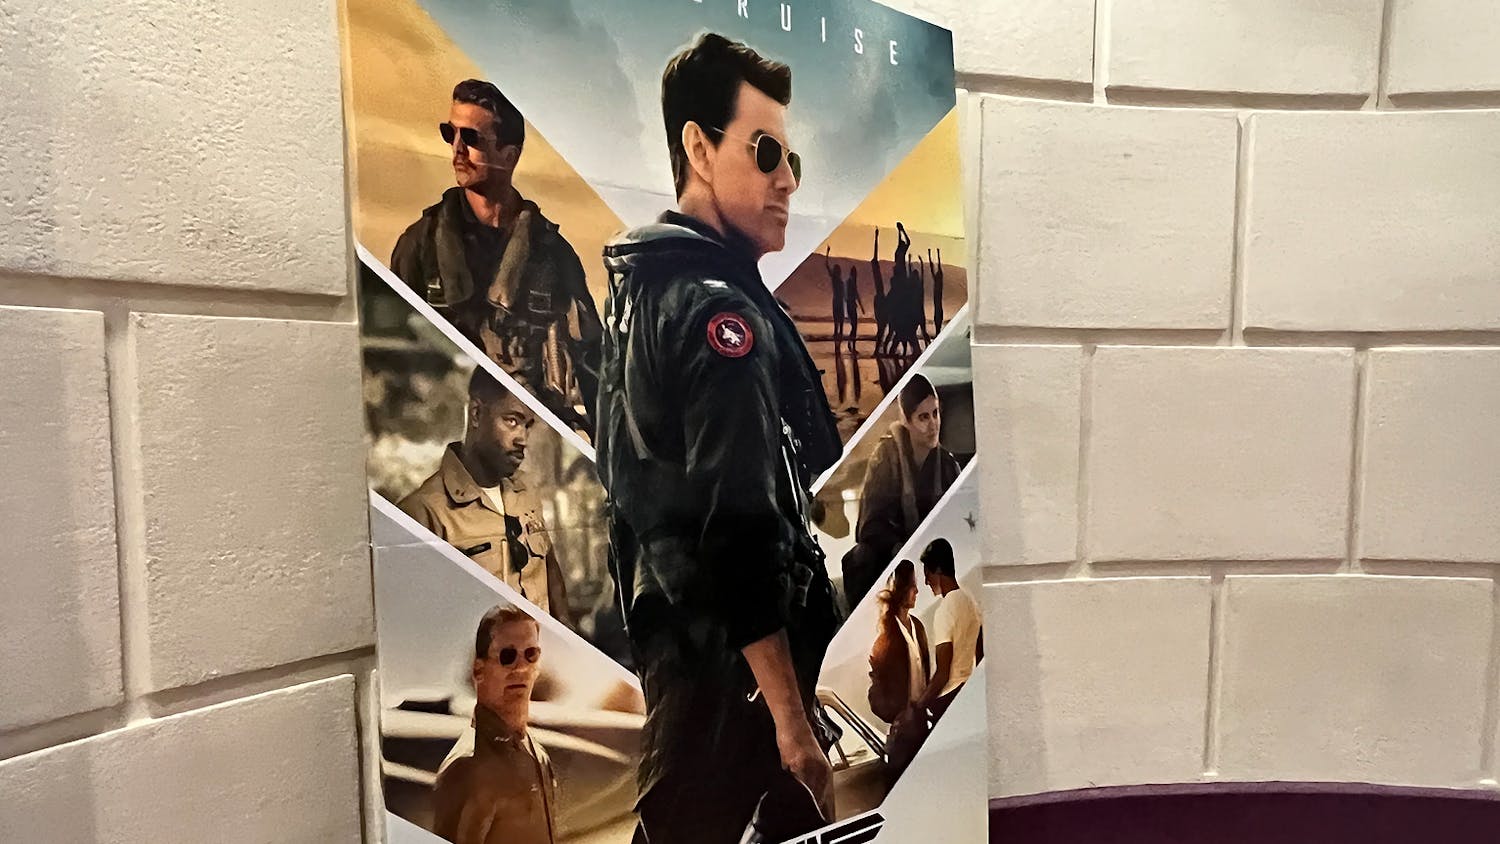 A promotional stand for "Top Gun: Maverick," released in movie theaters on May 27, 2022.